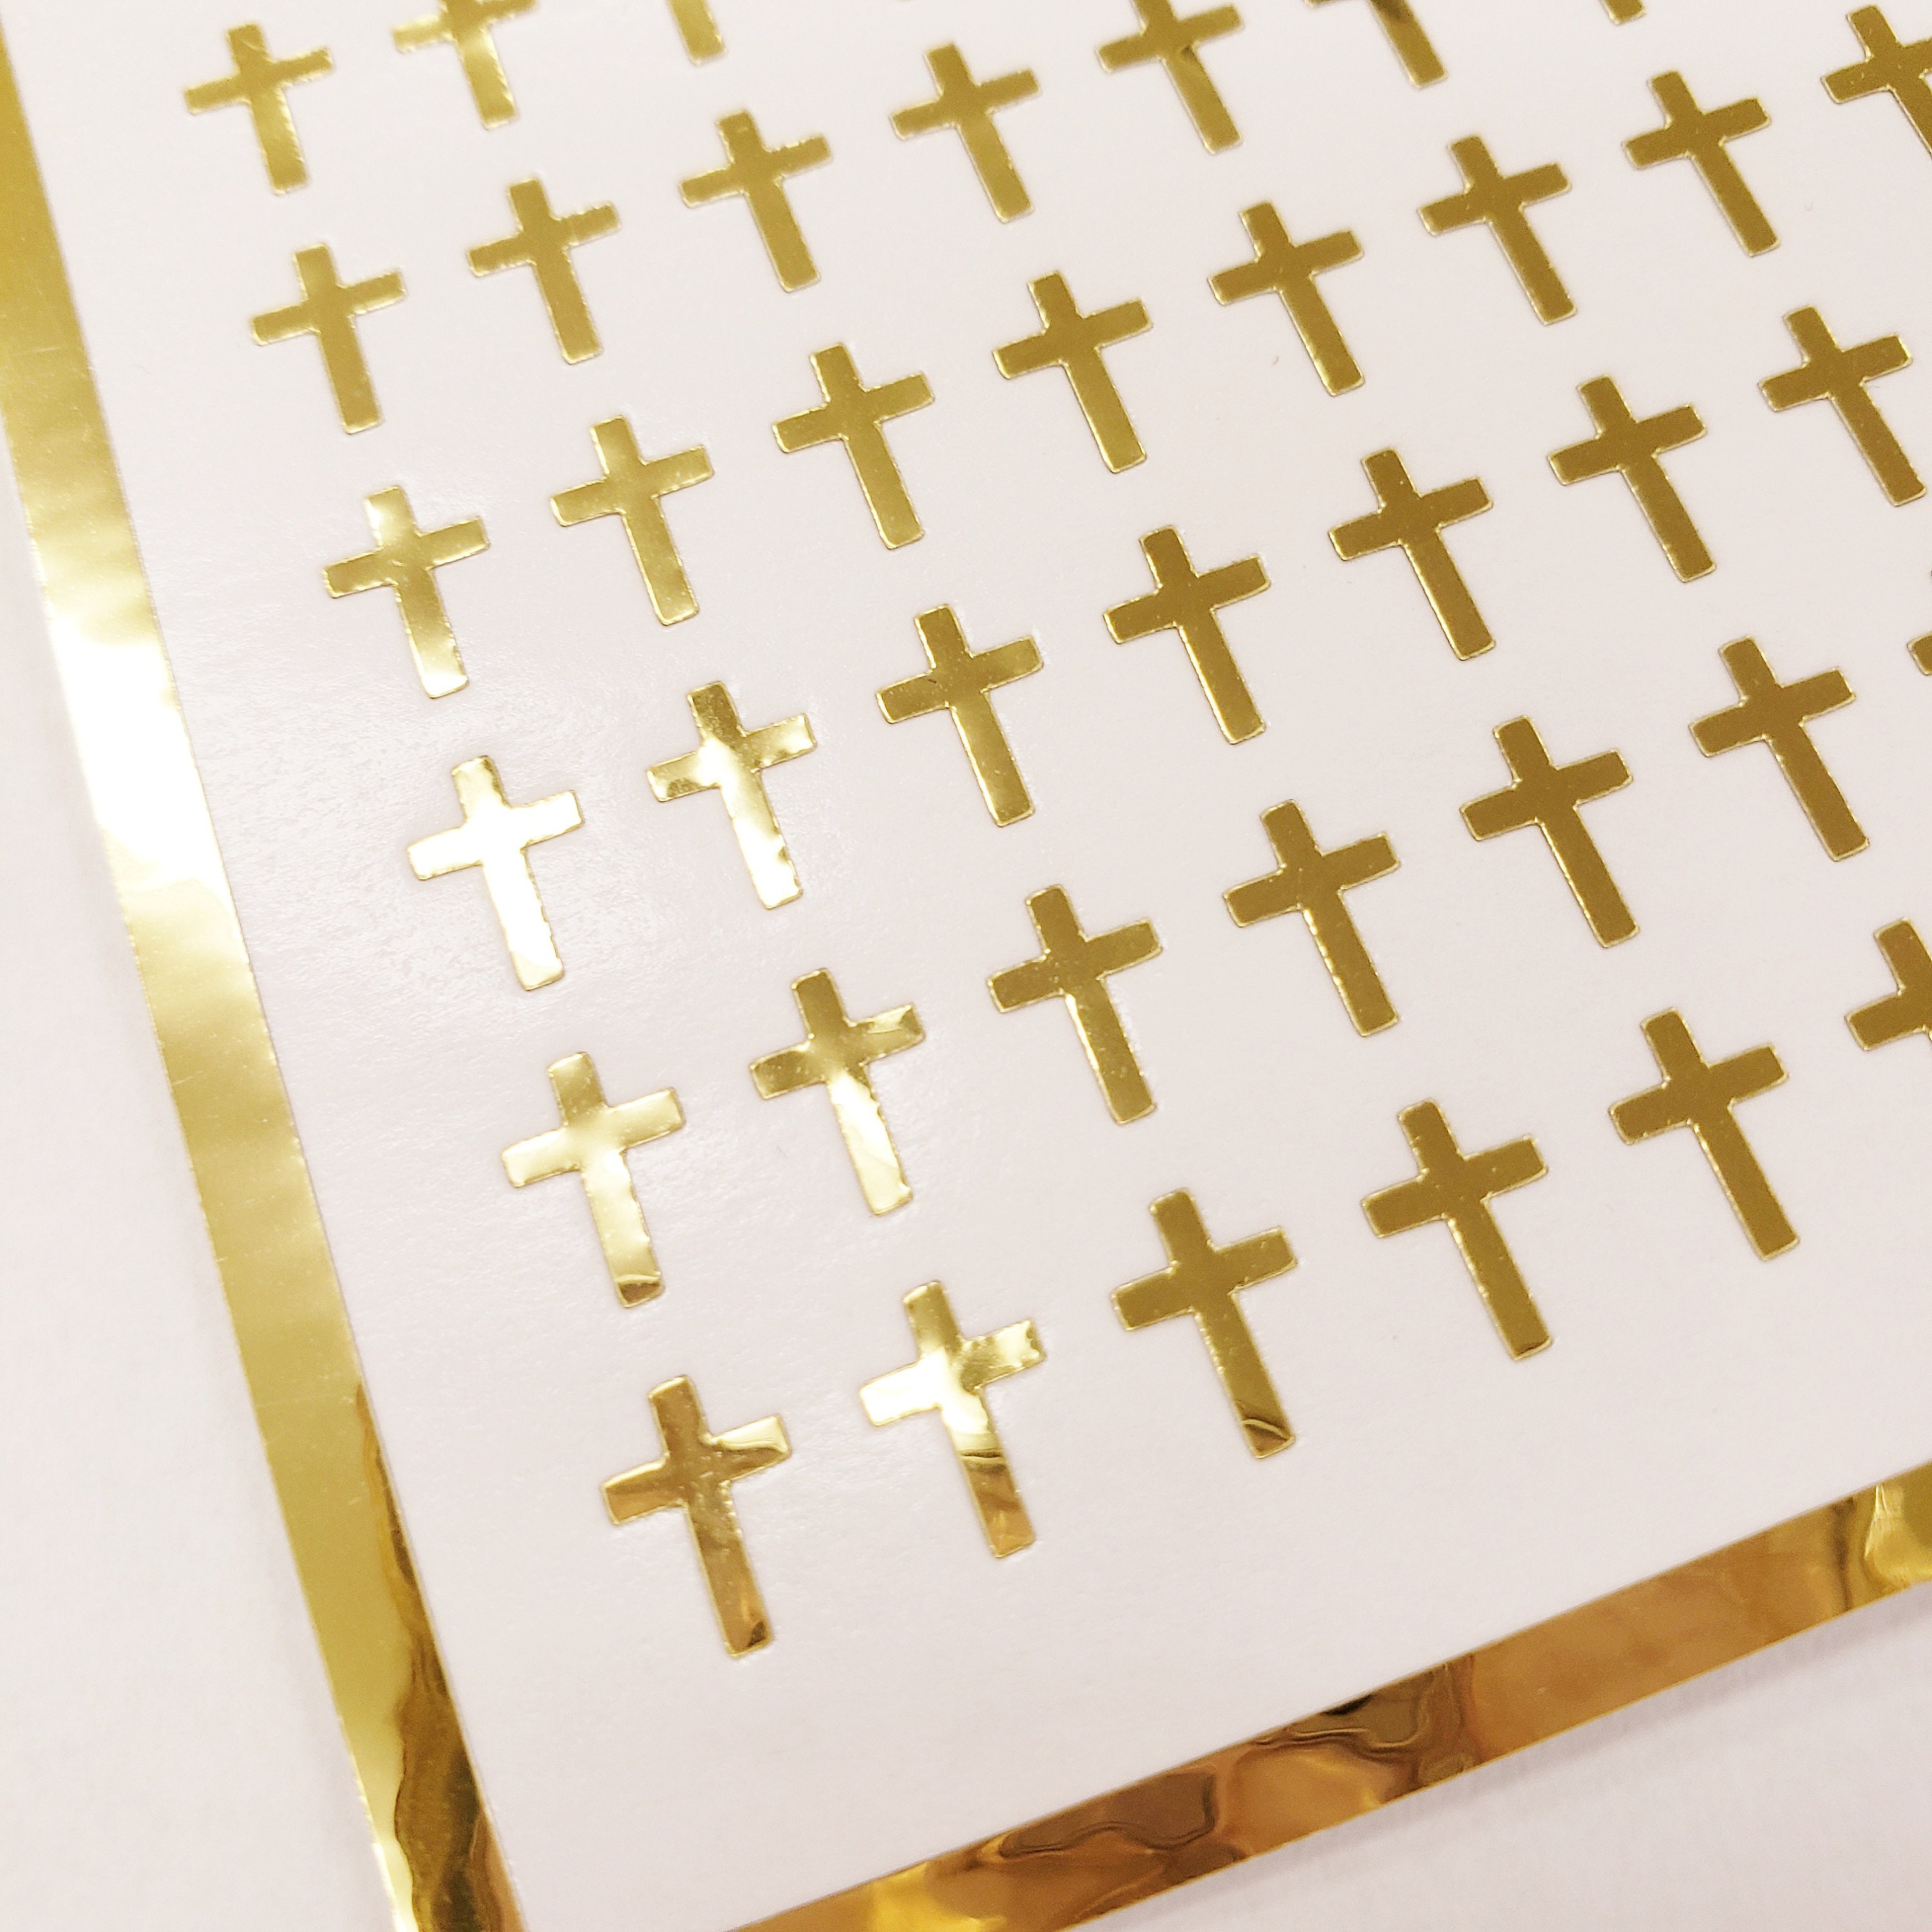 14K Gold Cross Charms, Gold Crosses, Cute Charms, Charm Bracelets, Jewelry Charms, 5 Charms per Pack, Gold Cross, Small Charms